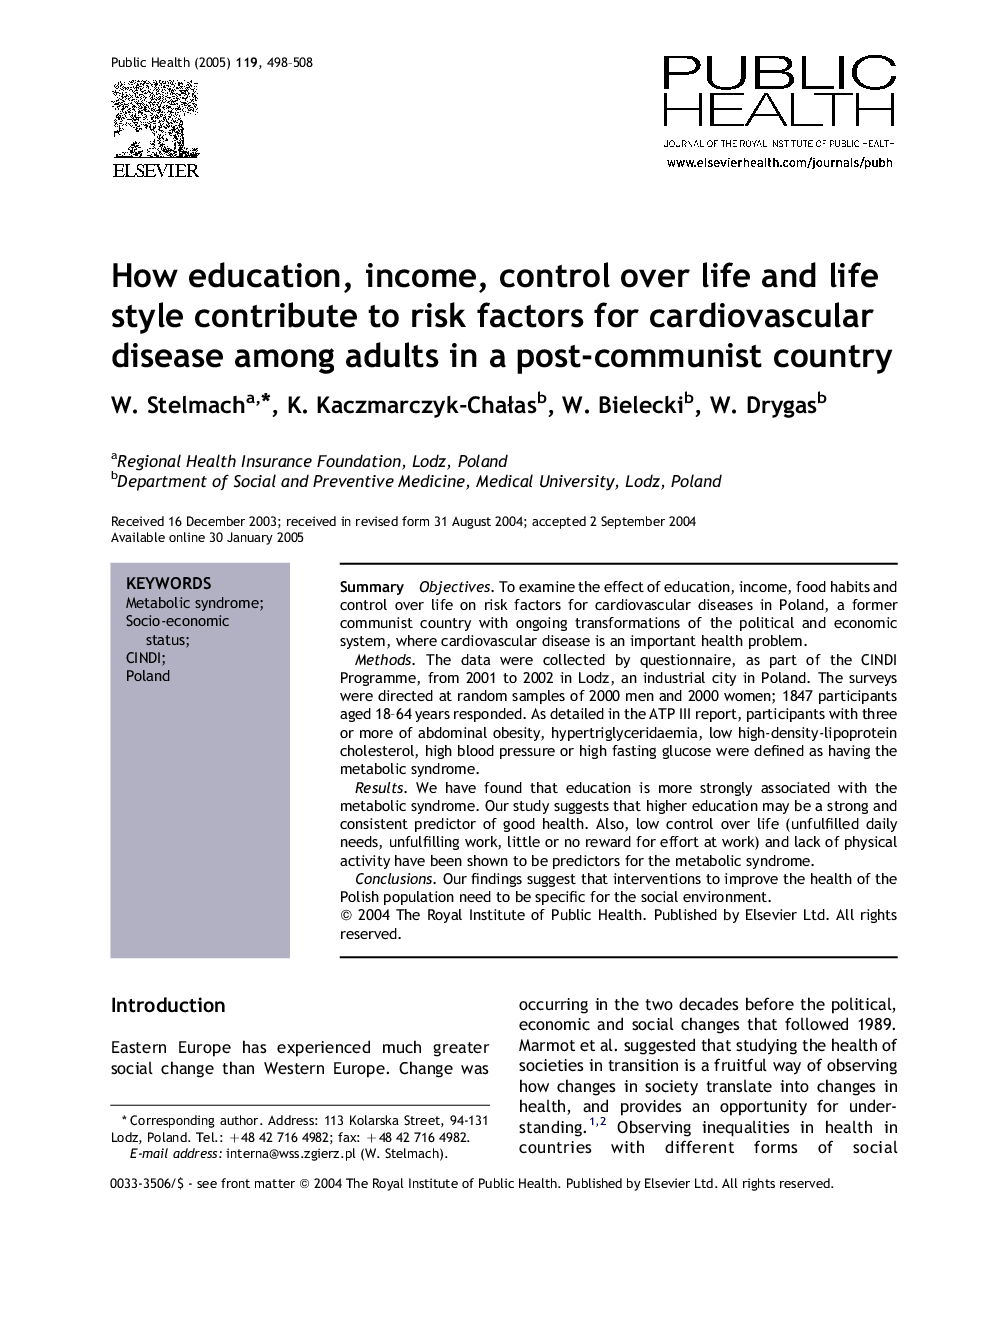 How education, income, control over life and life style contribute to risk factors for cardiovascular disease among adults in a post-communist country